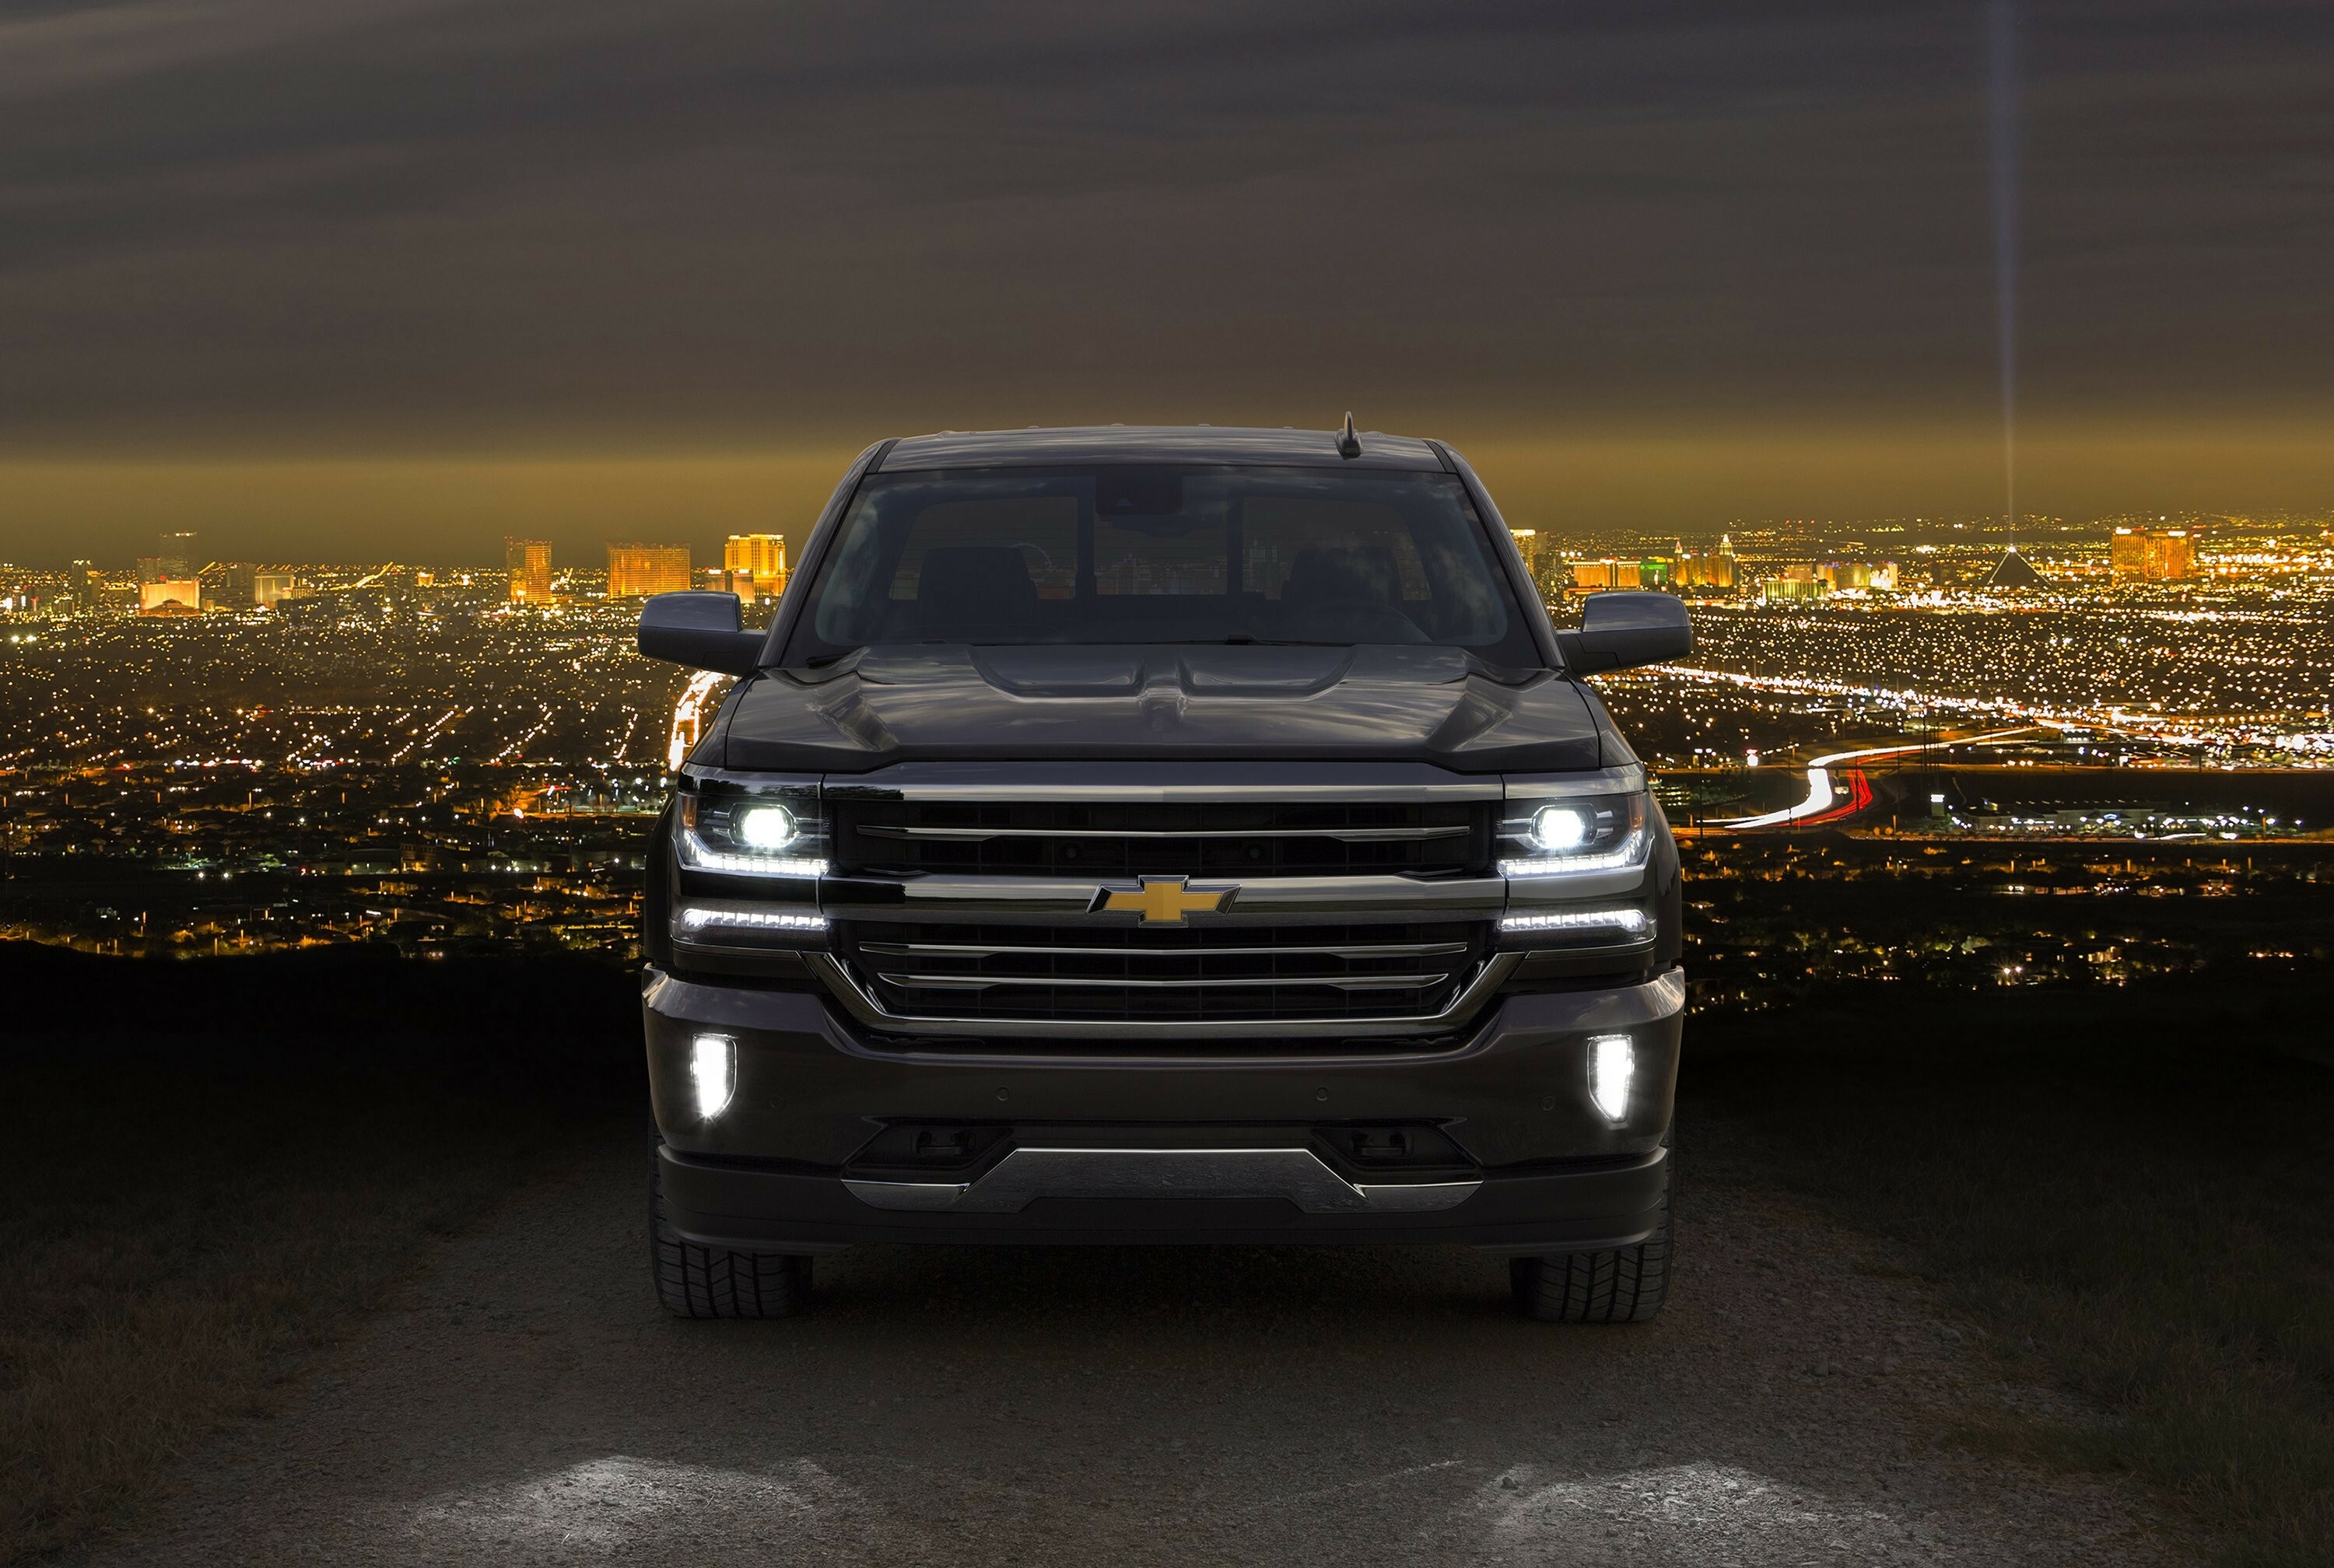 Chevrolet Silverado: Chevy truck, An off-road-ready exterior,  Industrial-chic styling. 3000x2020 HD Wallpaper.